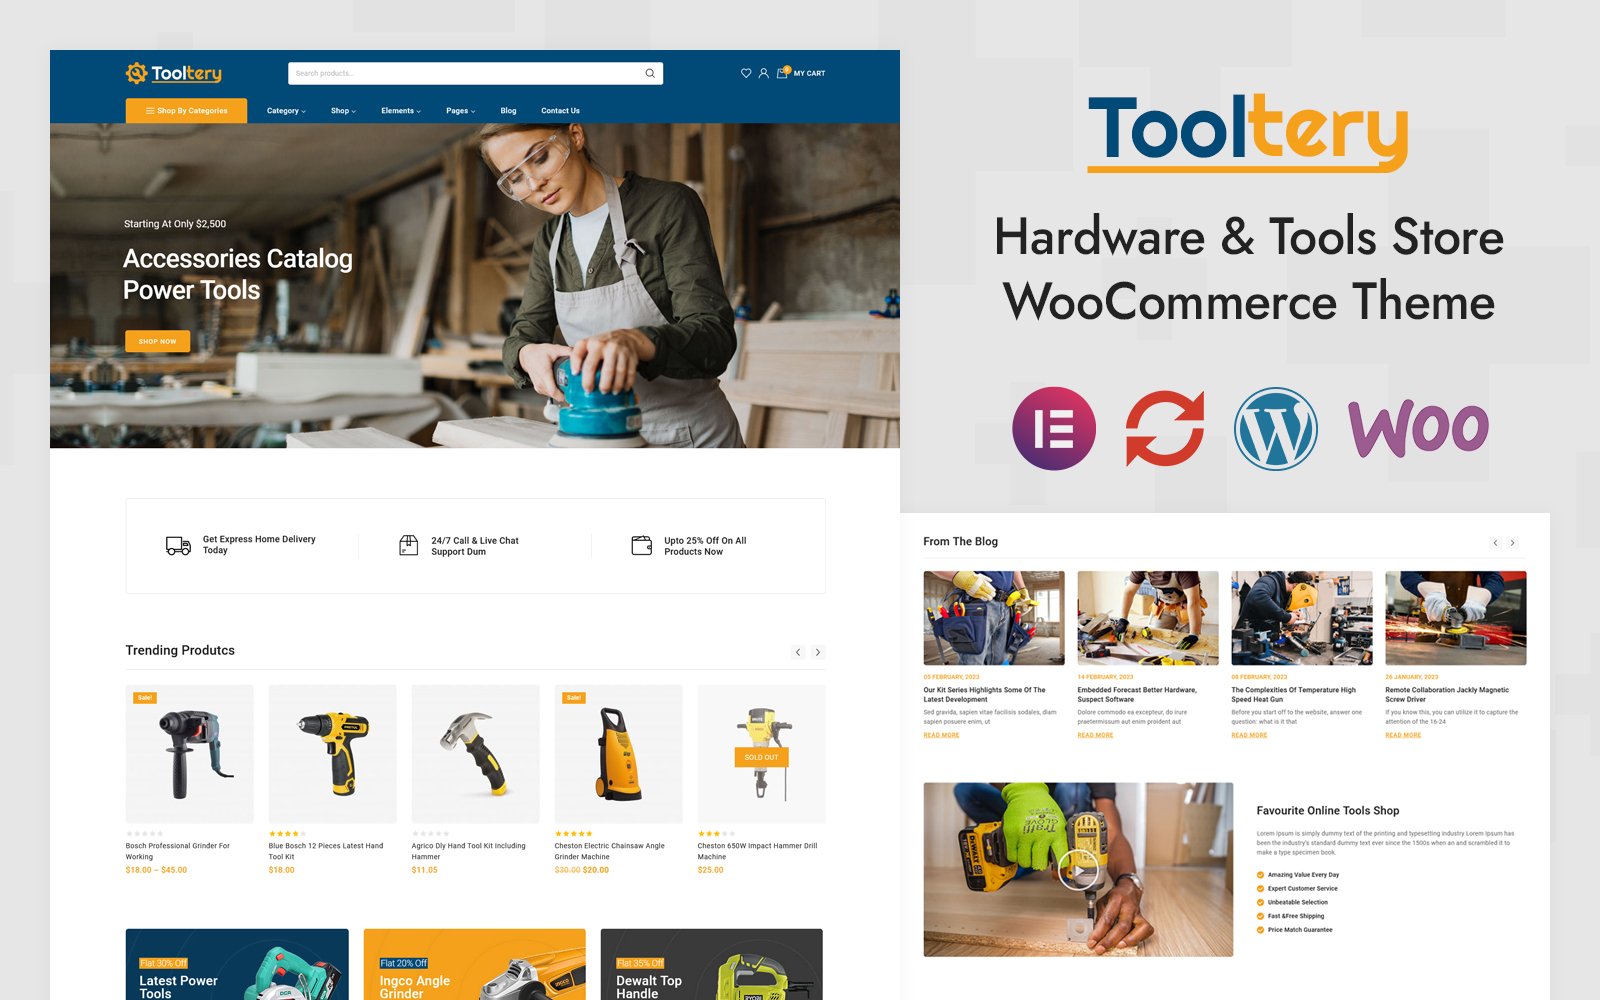 Template #318950 Tools Equipment Webdesign Template - Logo template Preview